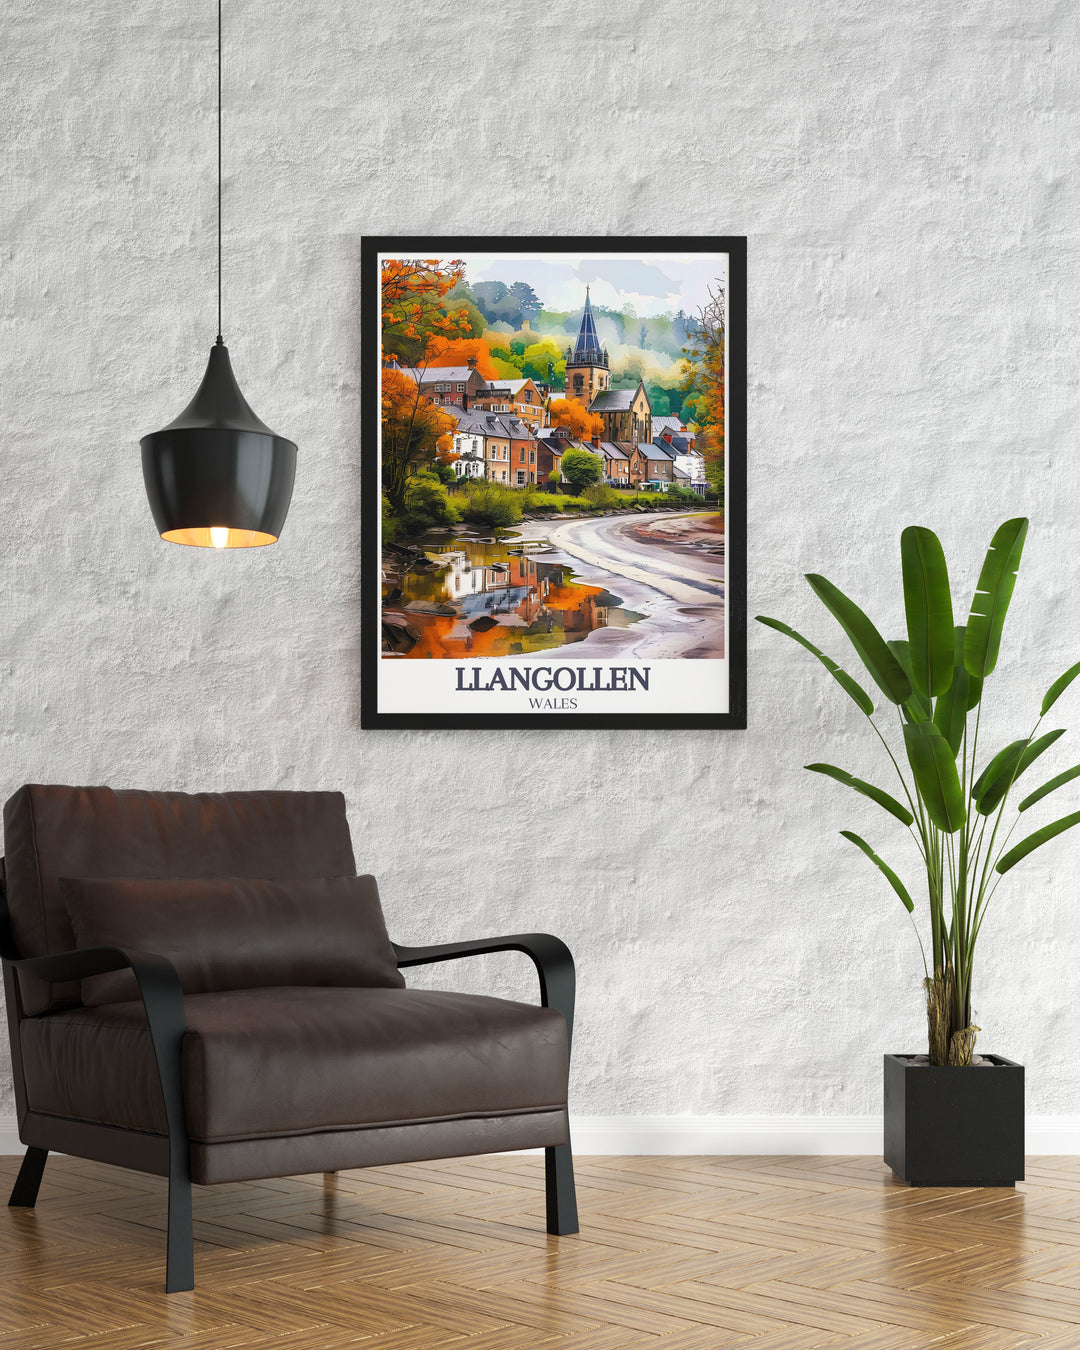 Celebrate Wales heritage with this wall art print of River Dee, Llangollen Canal, and Llangollen Methodist Church, adding charm to any room.